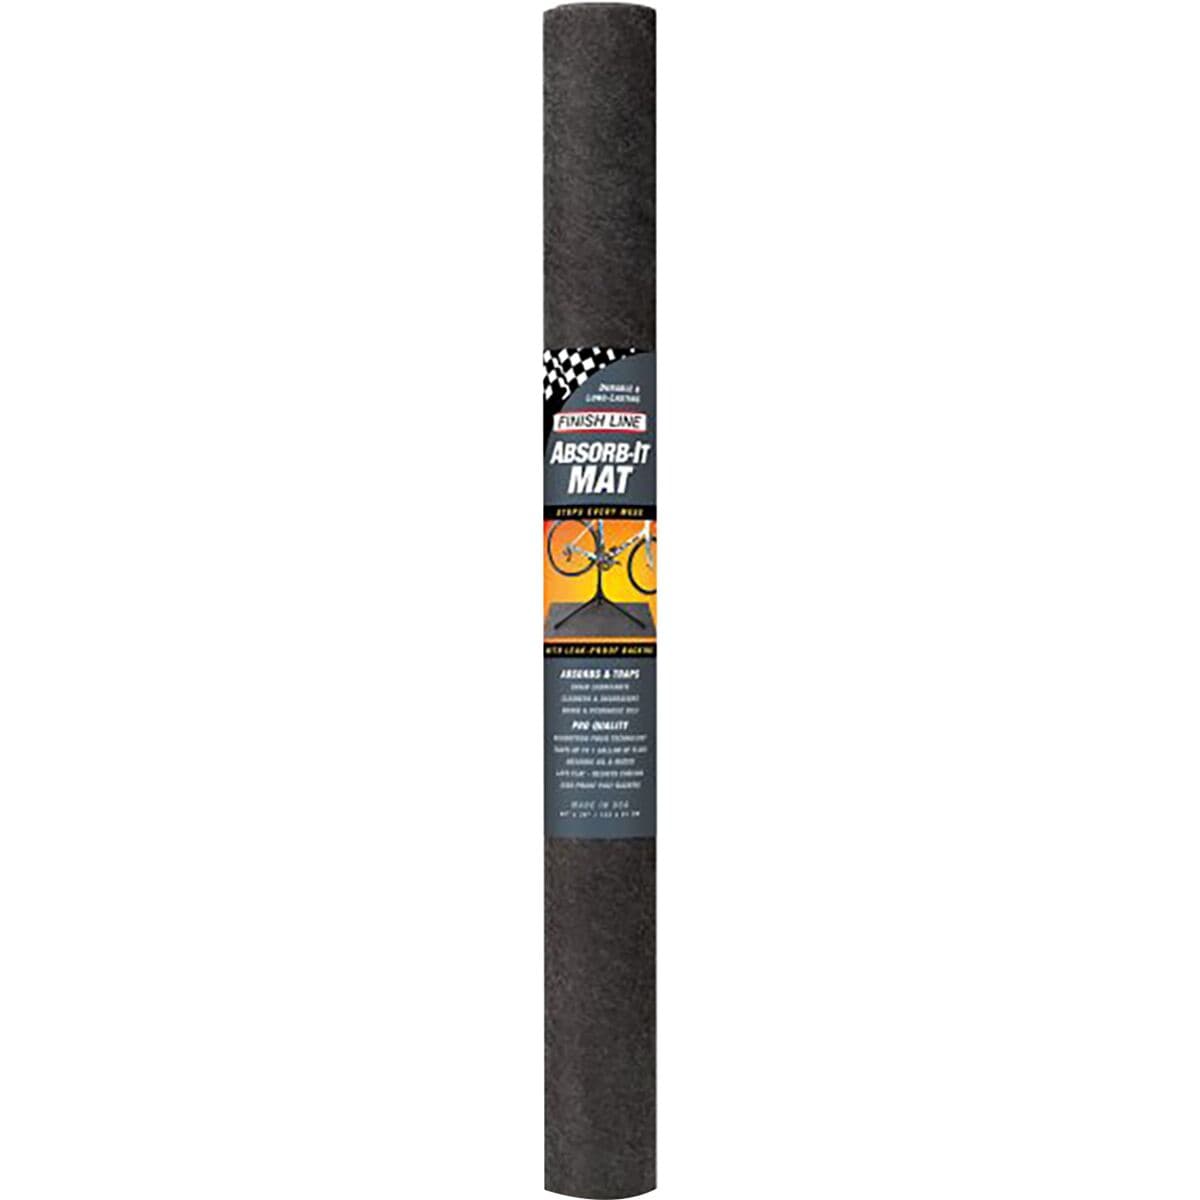 Finish Line Absorb-It Mat Small, 18in x 48in